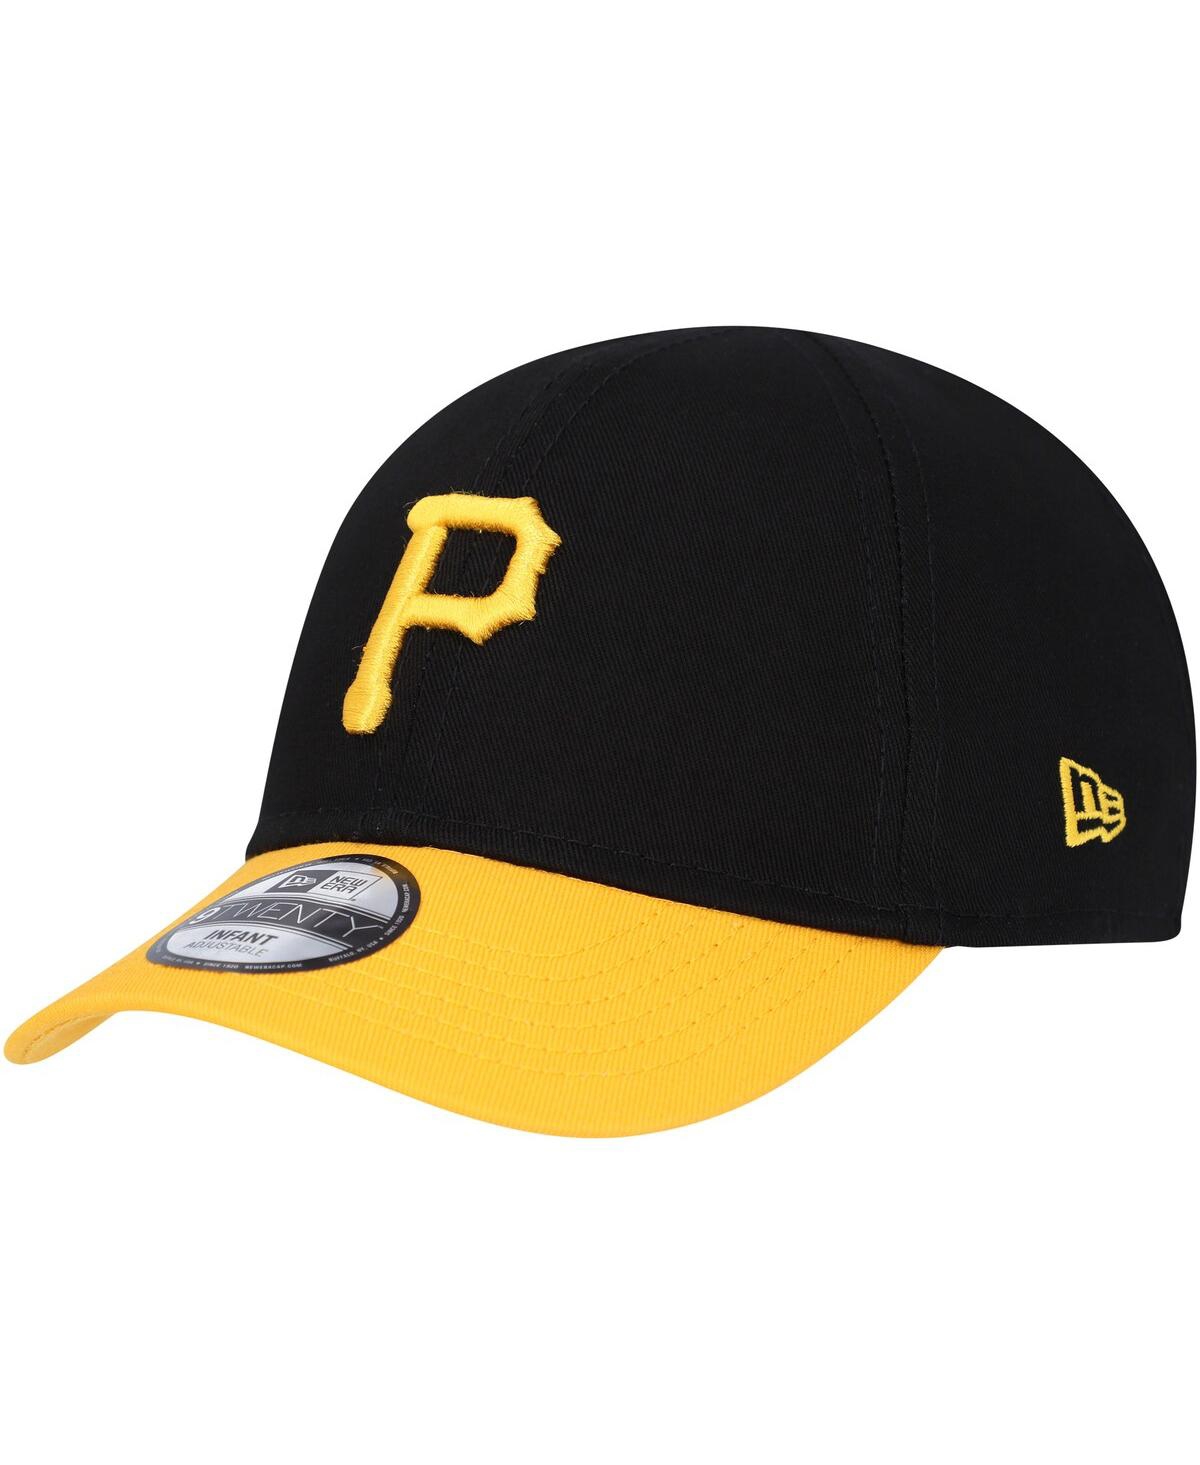 New Era Babies' Infant Unisex  Black Pittsburgh Pirates My First 9fifty Hat